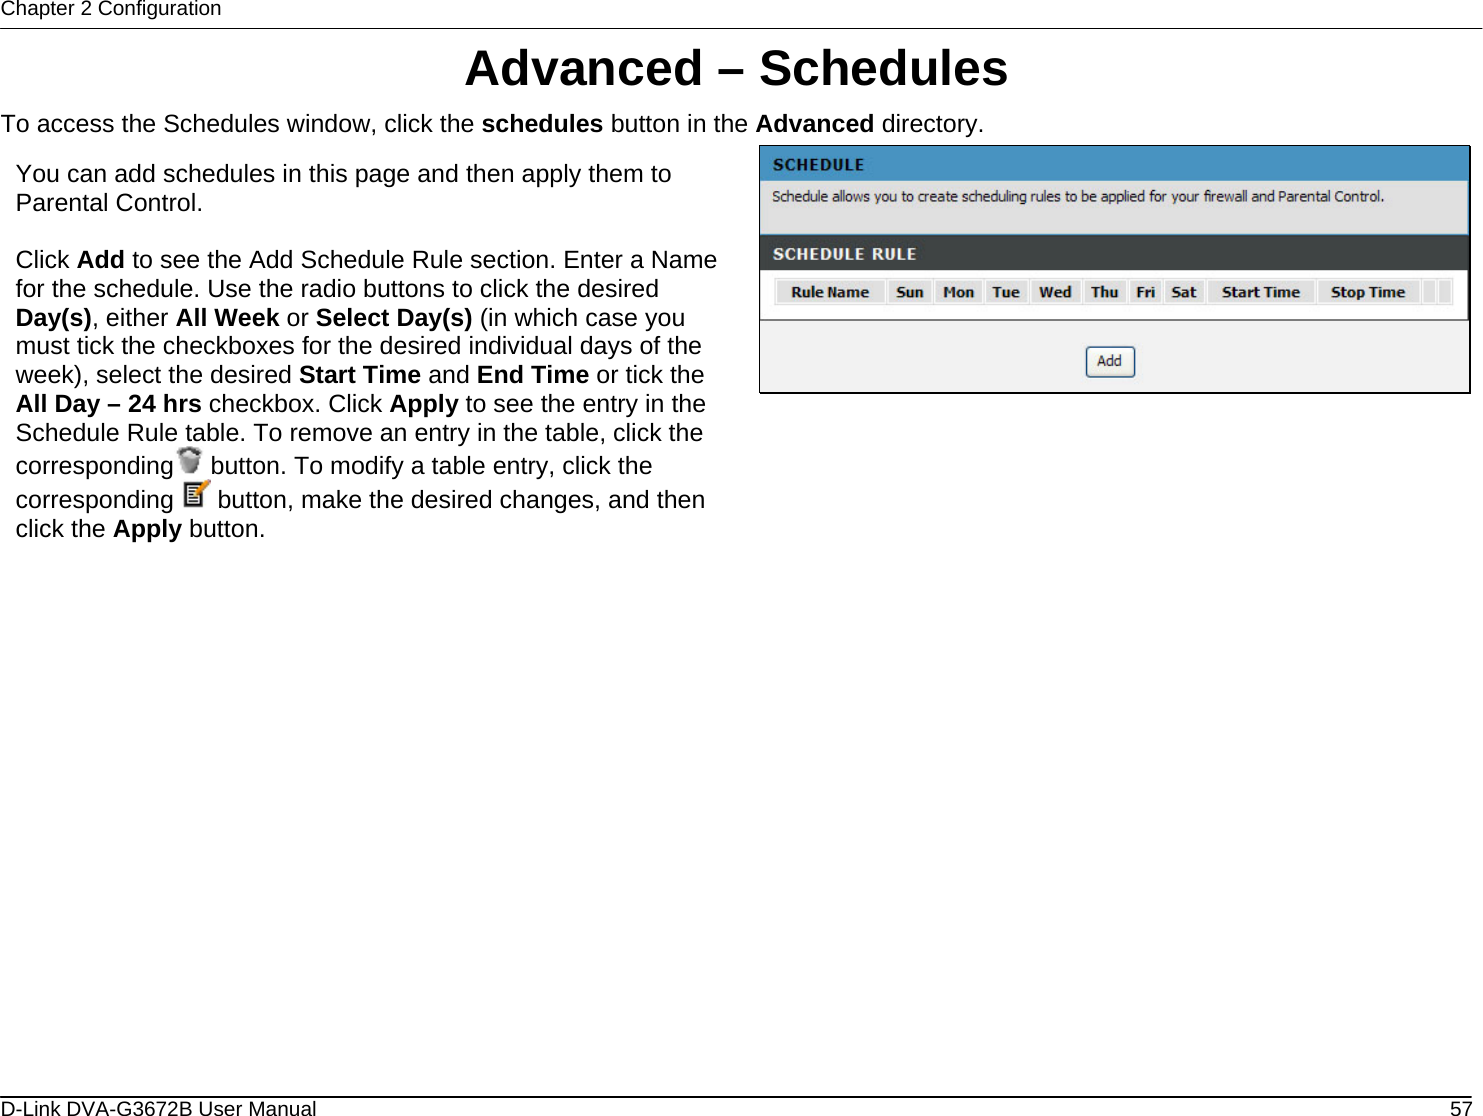 Chapter 2 Configuration Advanced – Schedules To access the Schedules window, click the schedules button in the Advanced directory.  You can add schedules in this page and then apply them to Parental Control.  Click Add to see the Add Schedule Rule section. Enter a Name for the schedule. Use the radio buttons to click the desired Day(s), either All Week or Select Day(s) (in which case you must tick the checkboxes for the desired individual days of the week), select the desired Start Time and End Time or tick the All Day – 24 hrs checkbox. Click Apply to see the entry in the Schedule Rule table. To remove an entry in the table, click the corresponding  button. To modify a table entry, click the corresponding   button, make the desired changes, and then click the Apply button.                         D-Link DVA-G3672B User Manual  57